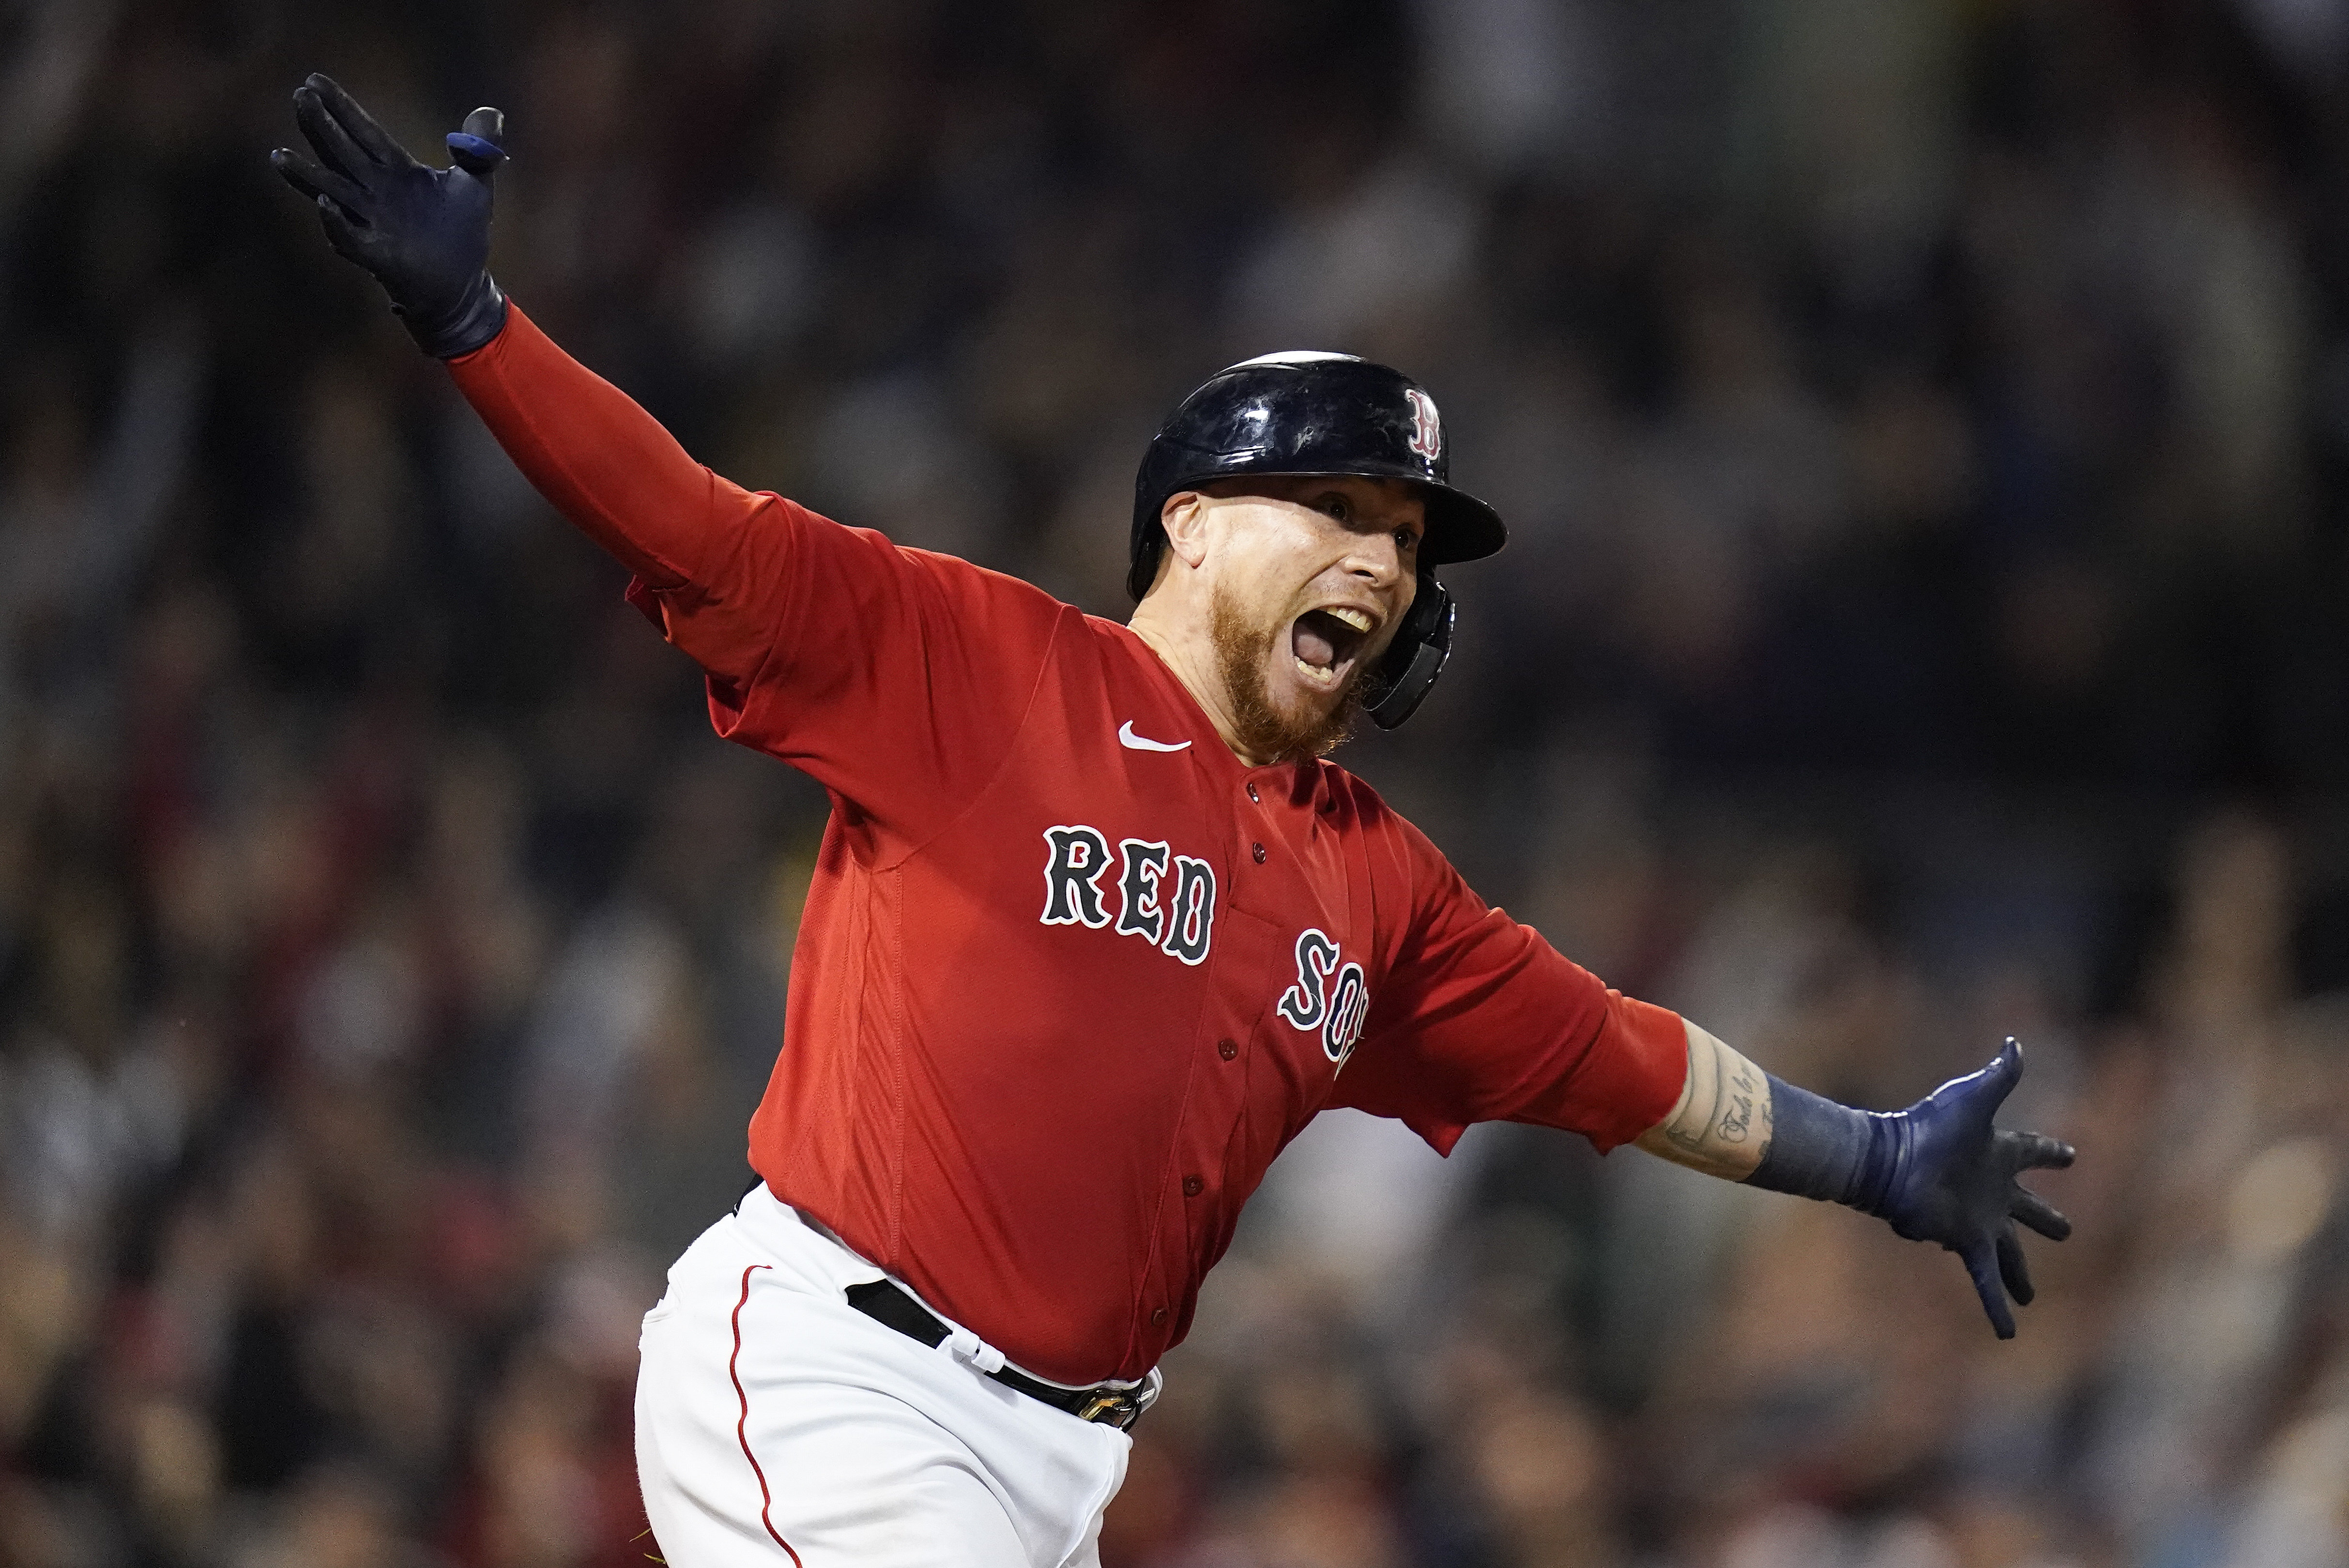 Report: Angels interested in Red Sox catcher Vazquez